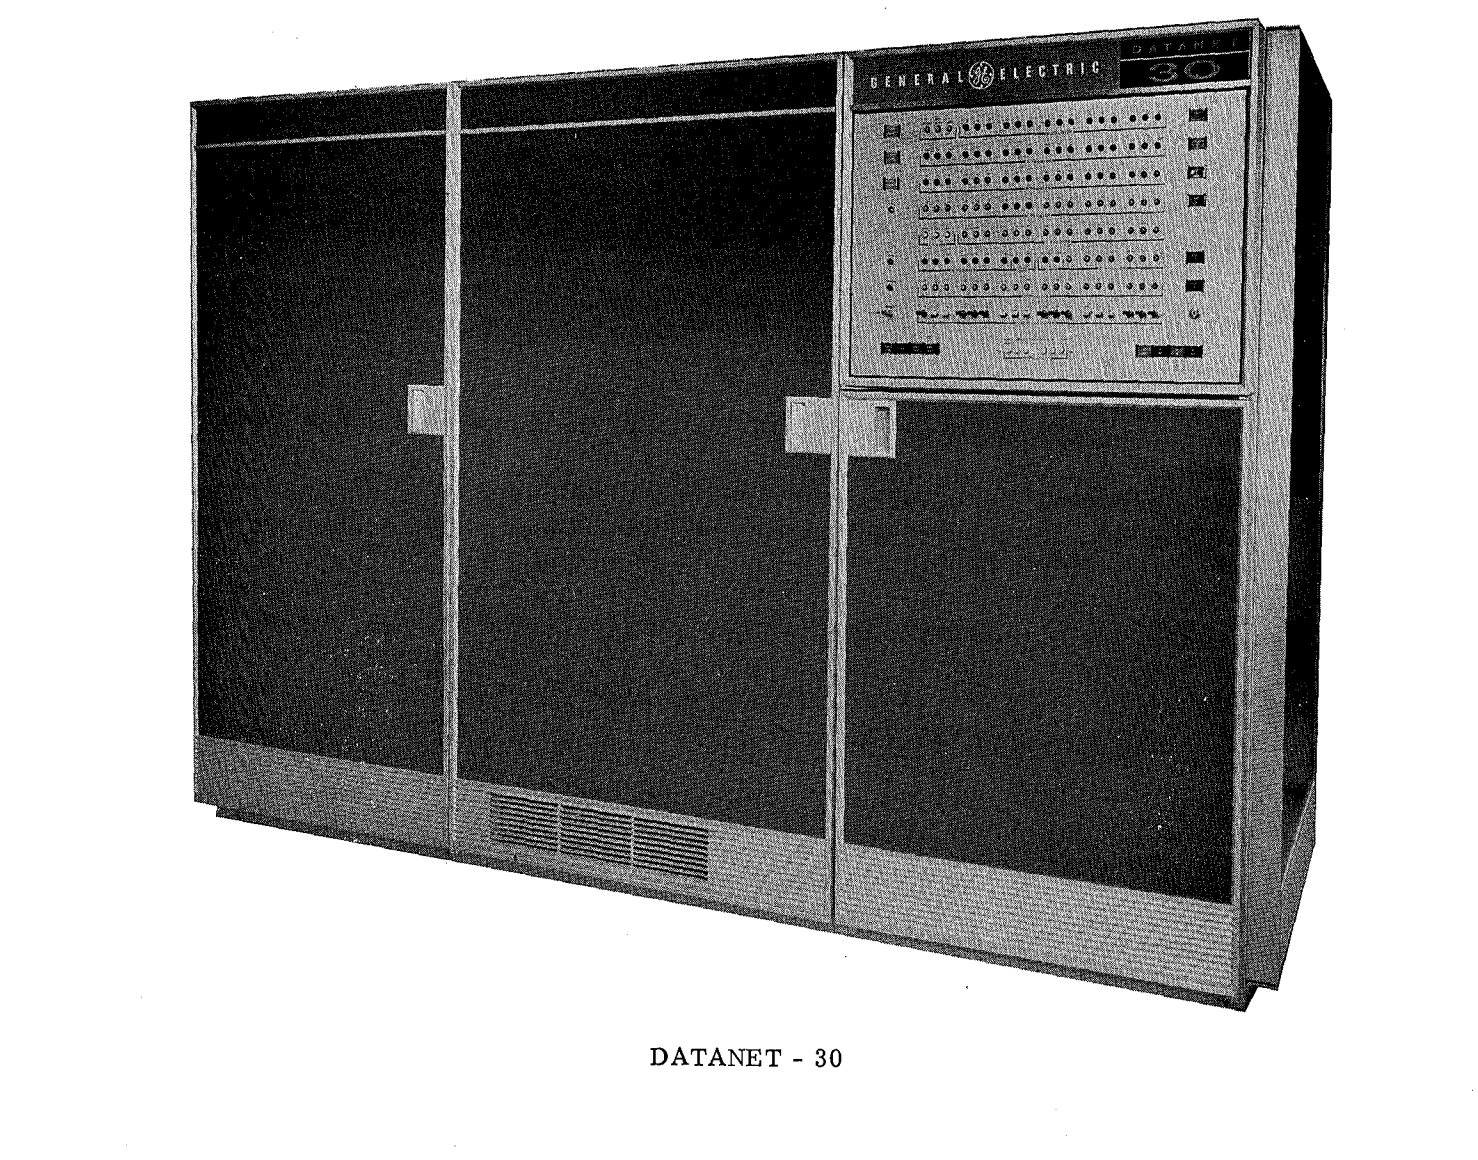 A black and white image of the General Electric Datanet-30. The
						computer resembles three refridgerators in size and form, with the
						right-most door being cut short by an access panel with indicator
						lights.